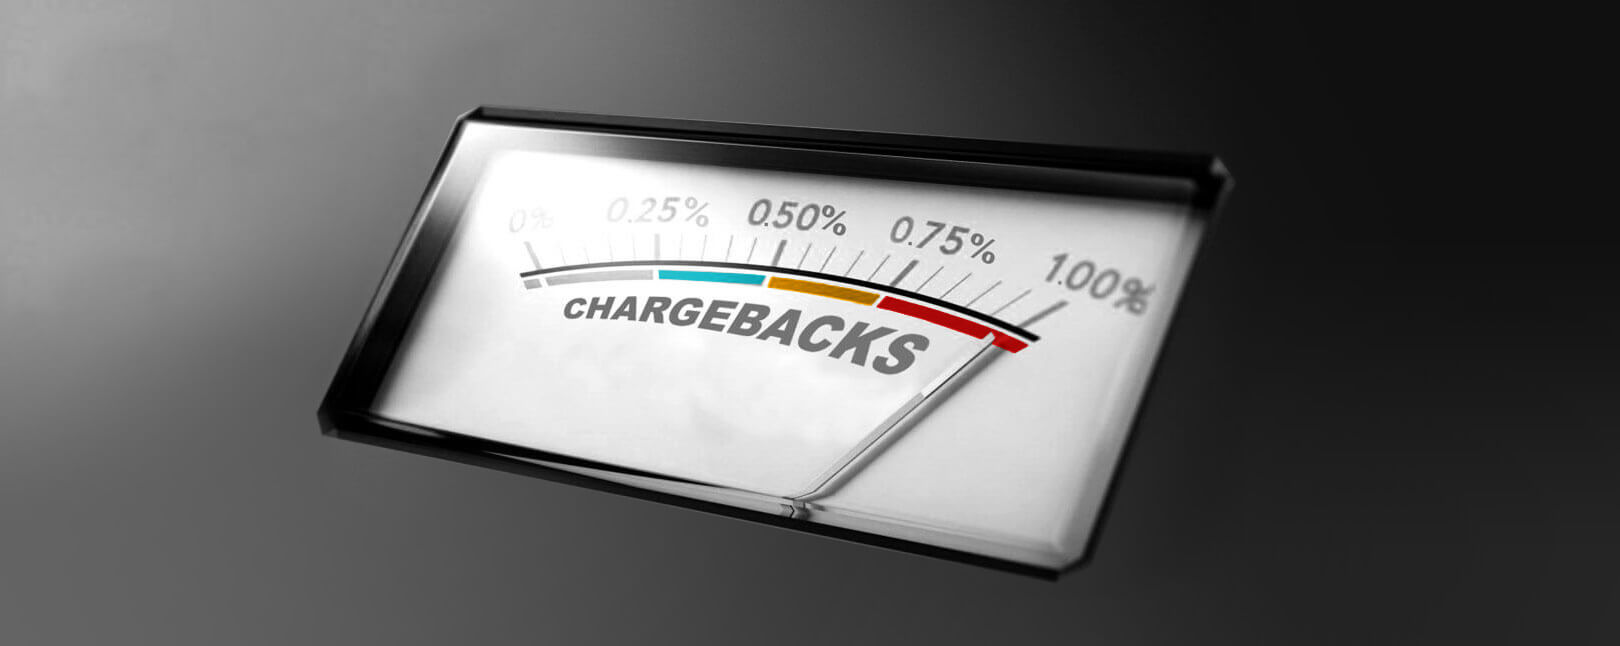 Chargeback Rate